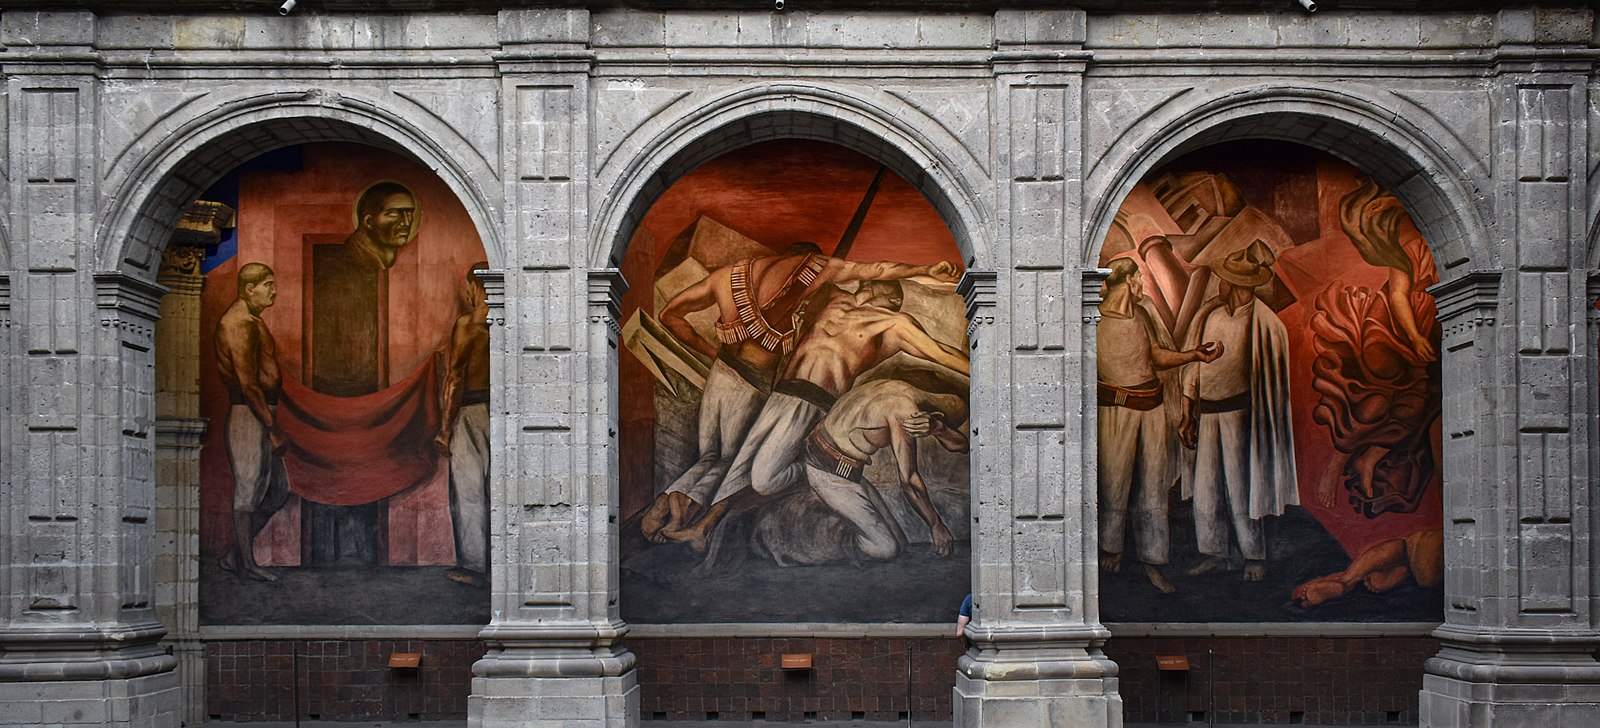 A mural scene with five men in three different parts